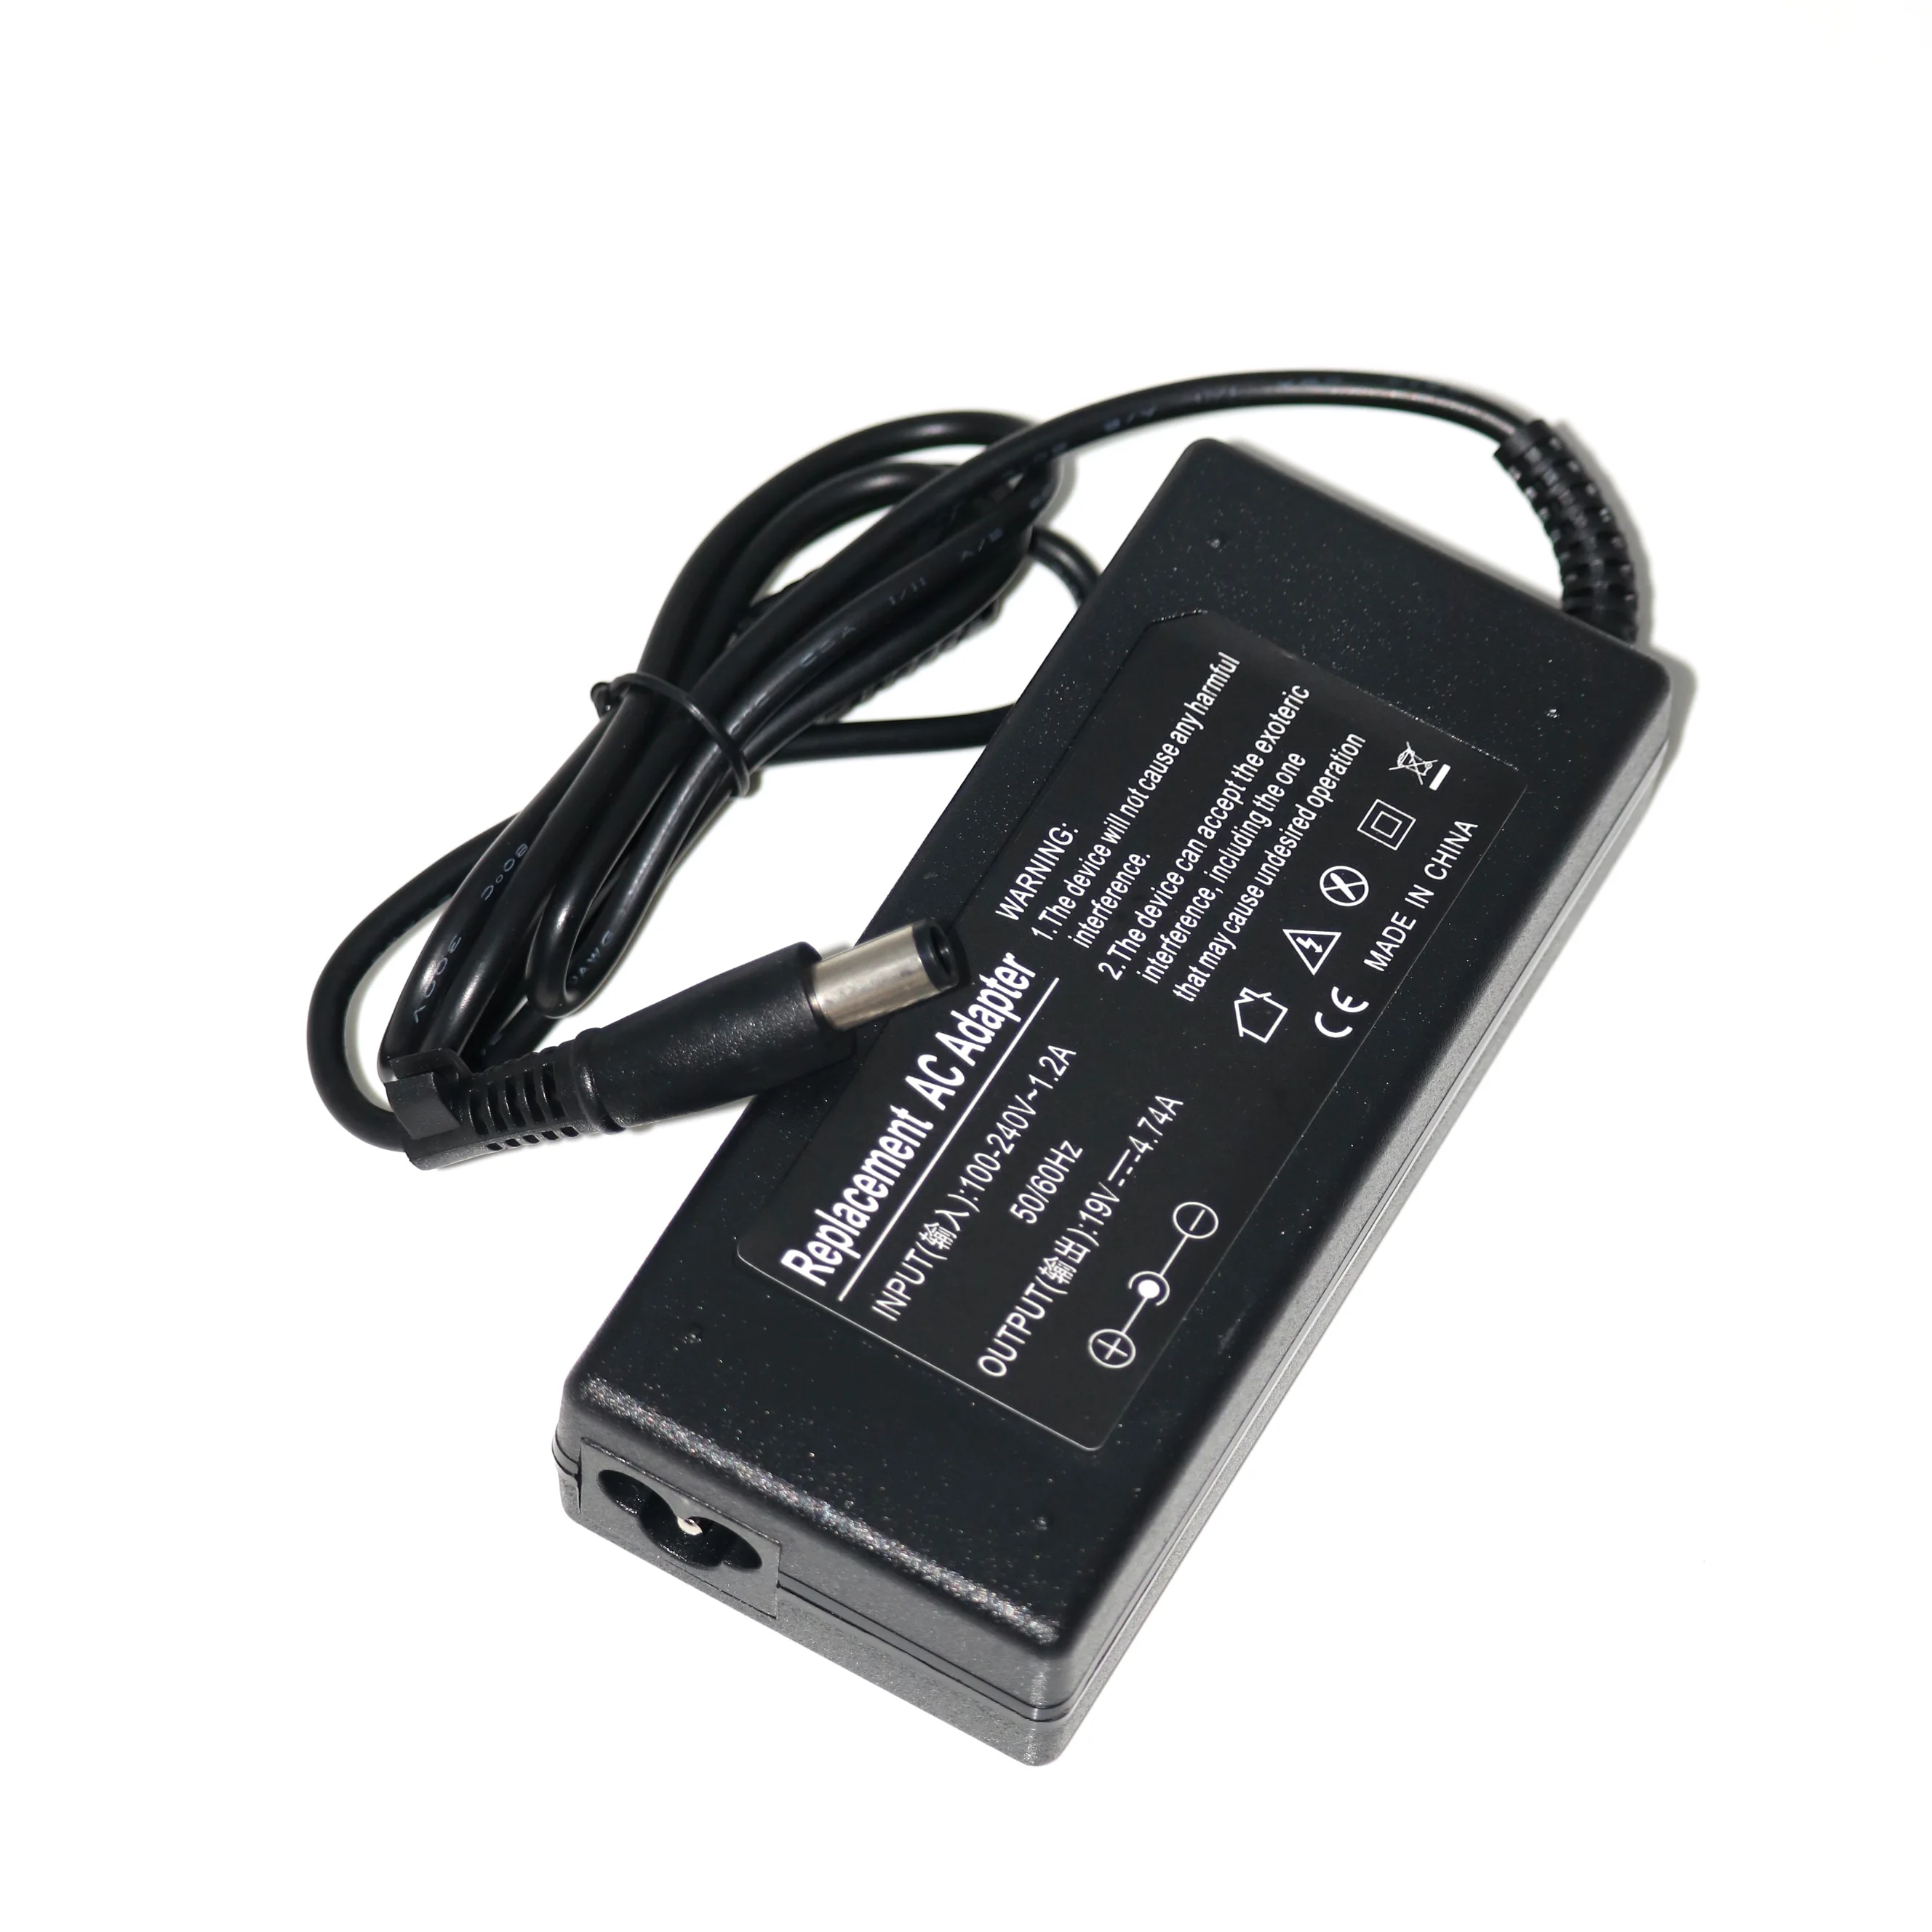 19V 4.74A 7.4x5.0mm Notebook Adapter Power Supply For HP 63955-001 609940-001 PPP012H-S Pavilion Dv4 Dv5 G4 G6 G7 AC Charger genuine tpn ca13 19 5v 6 9a ac adapter charger tpn da11 l15534 001 135w power supply for hp pavilion bc400ur laptop adapter